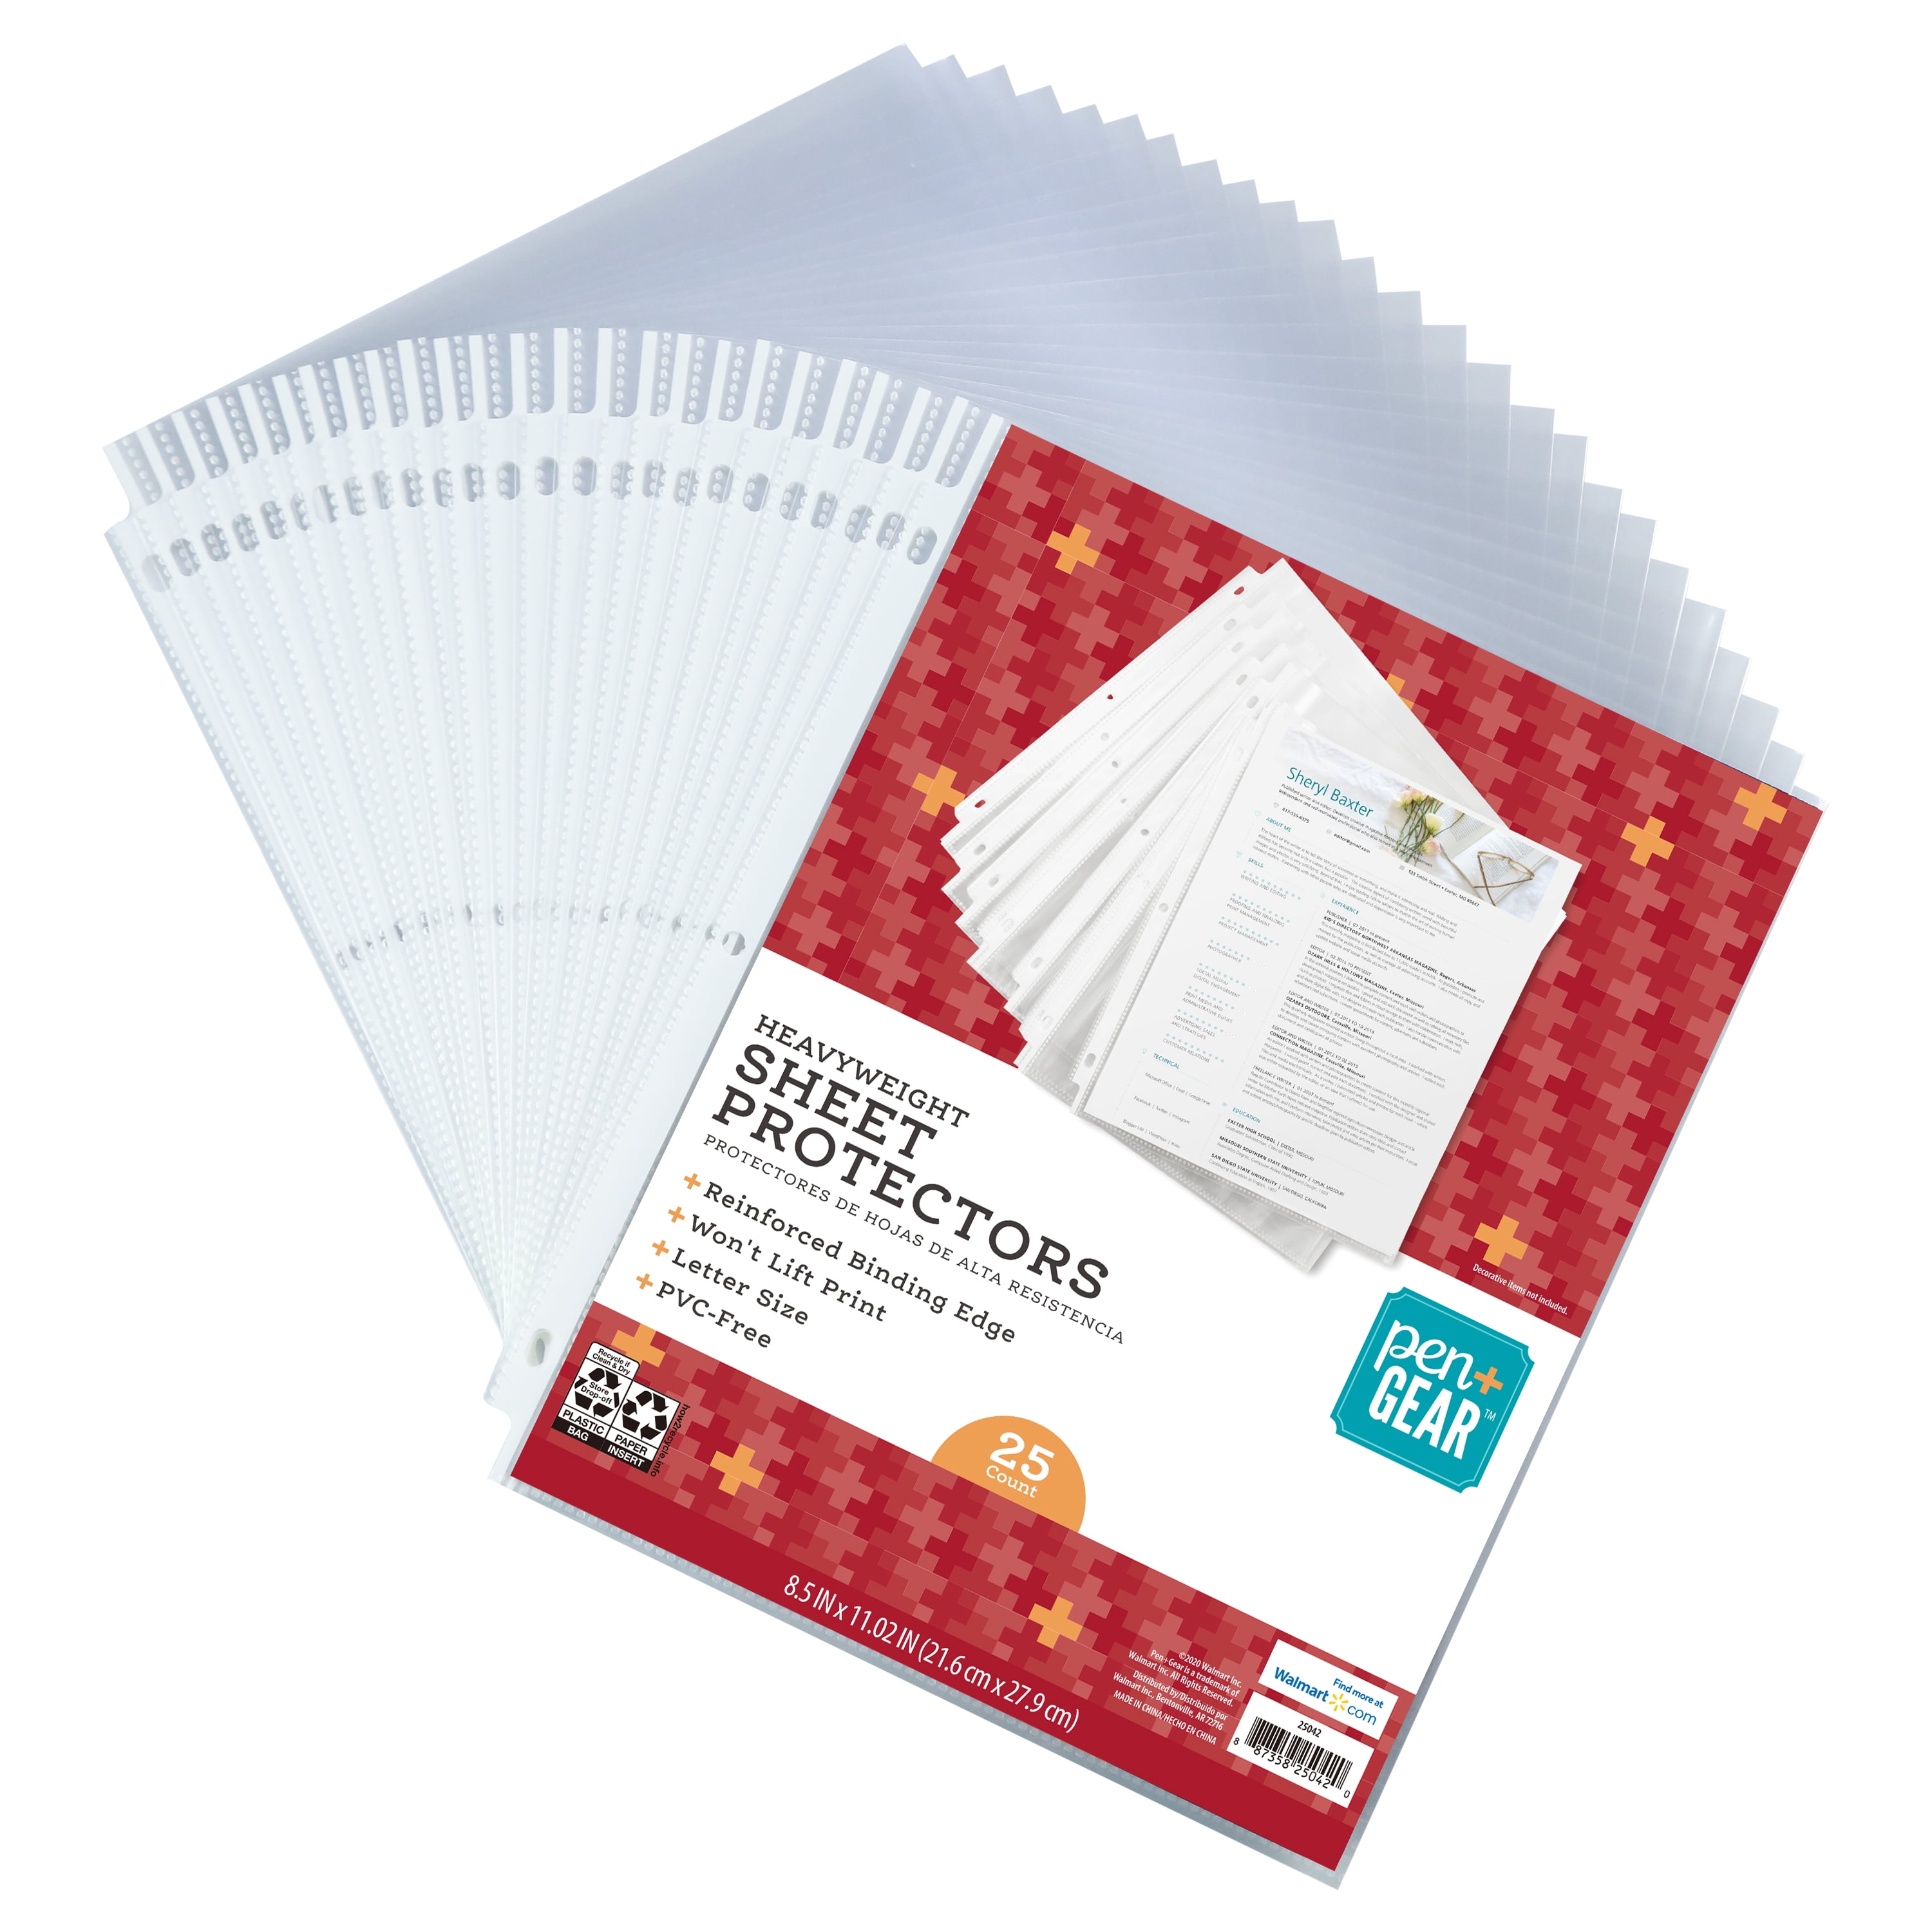 pk of 500 Sheets Benz Microscope Weighing Paper 6 x 6